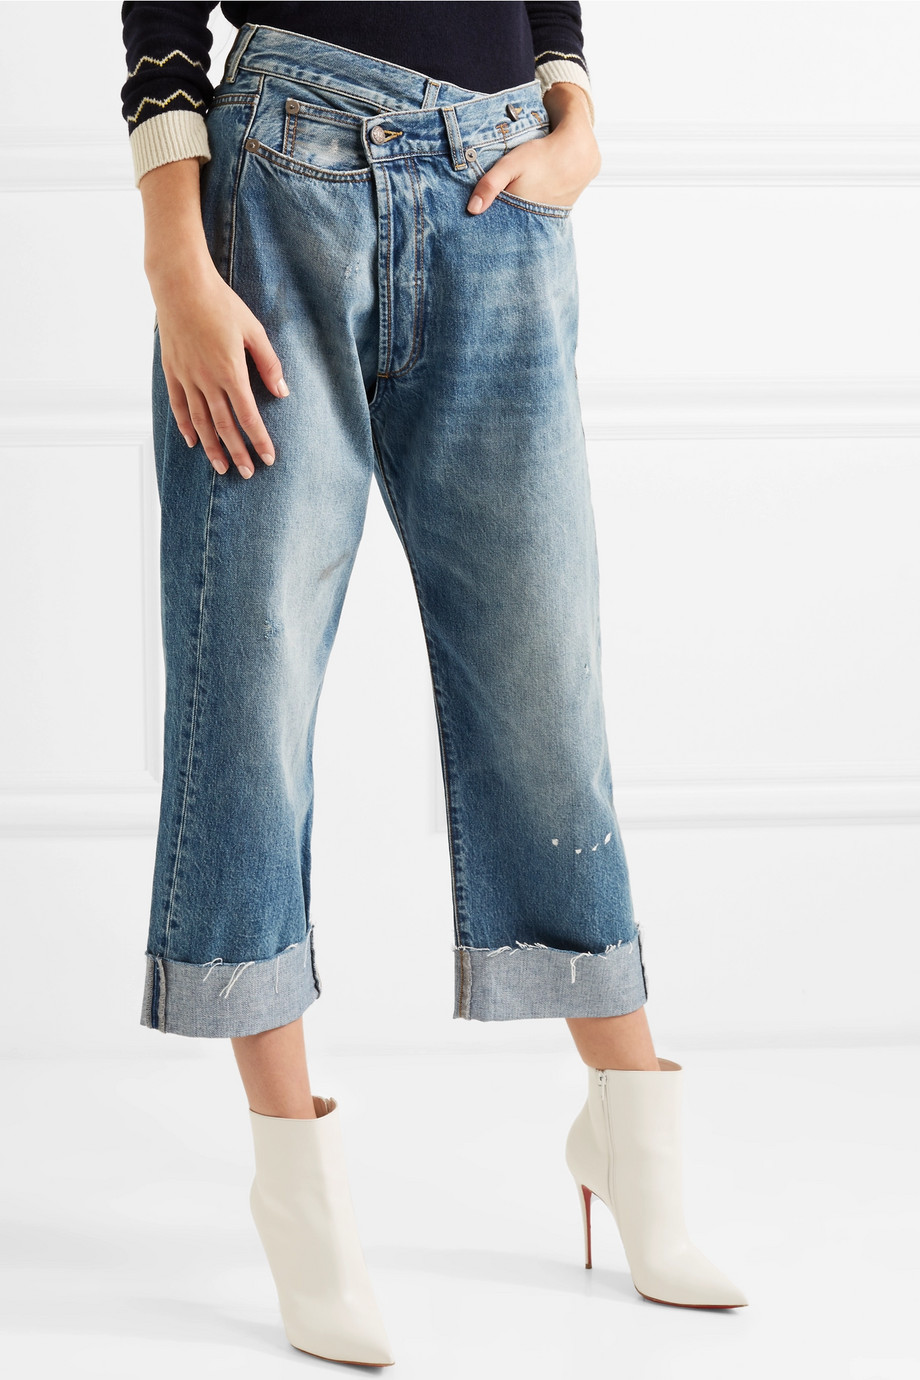 Unexpected Denim Pieces You'll Want To Add To Your Fall Wardrobe